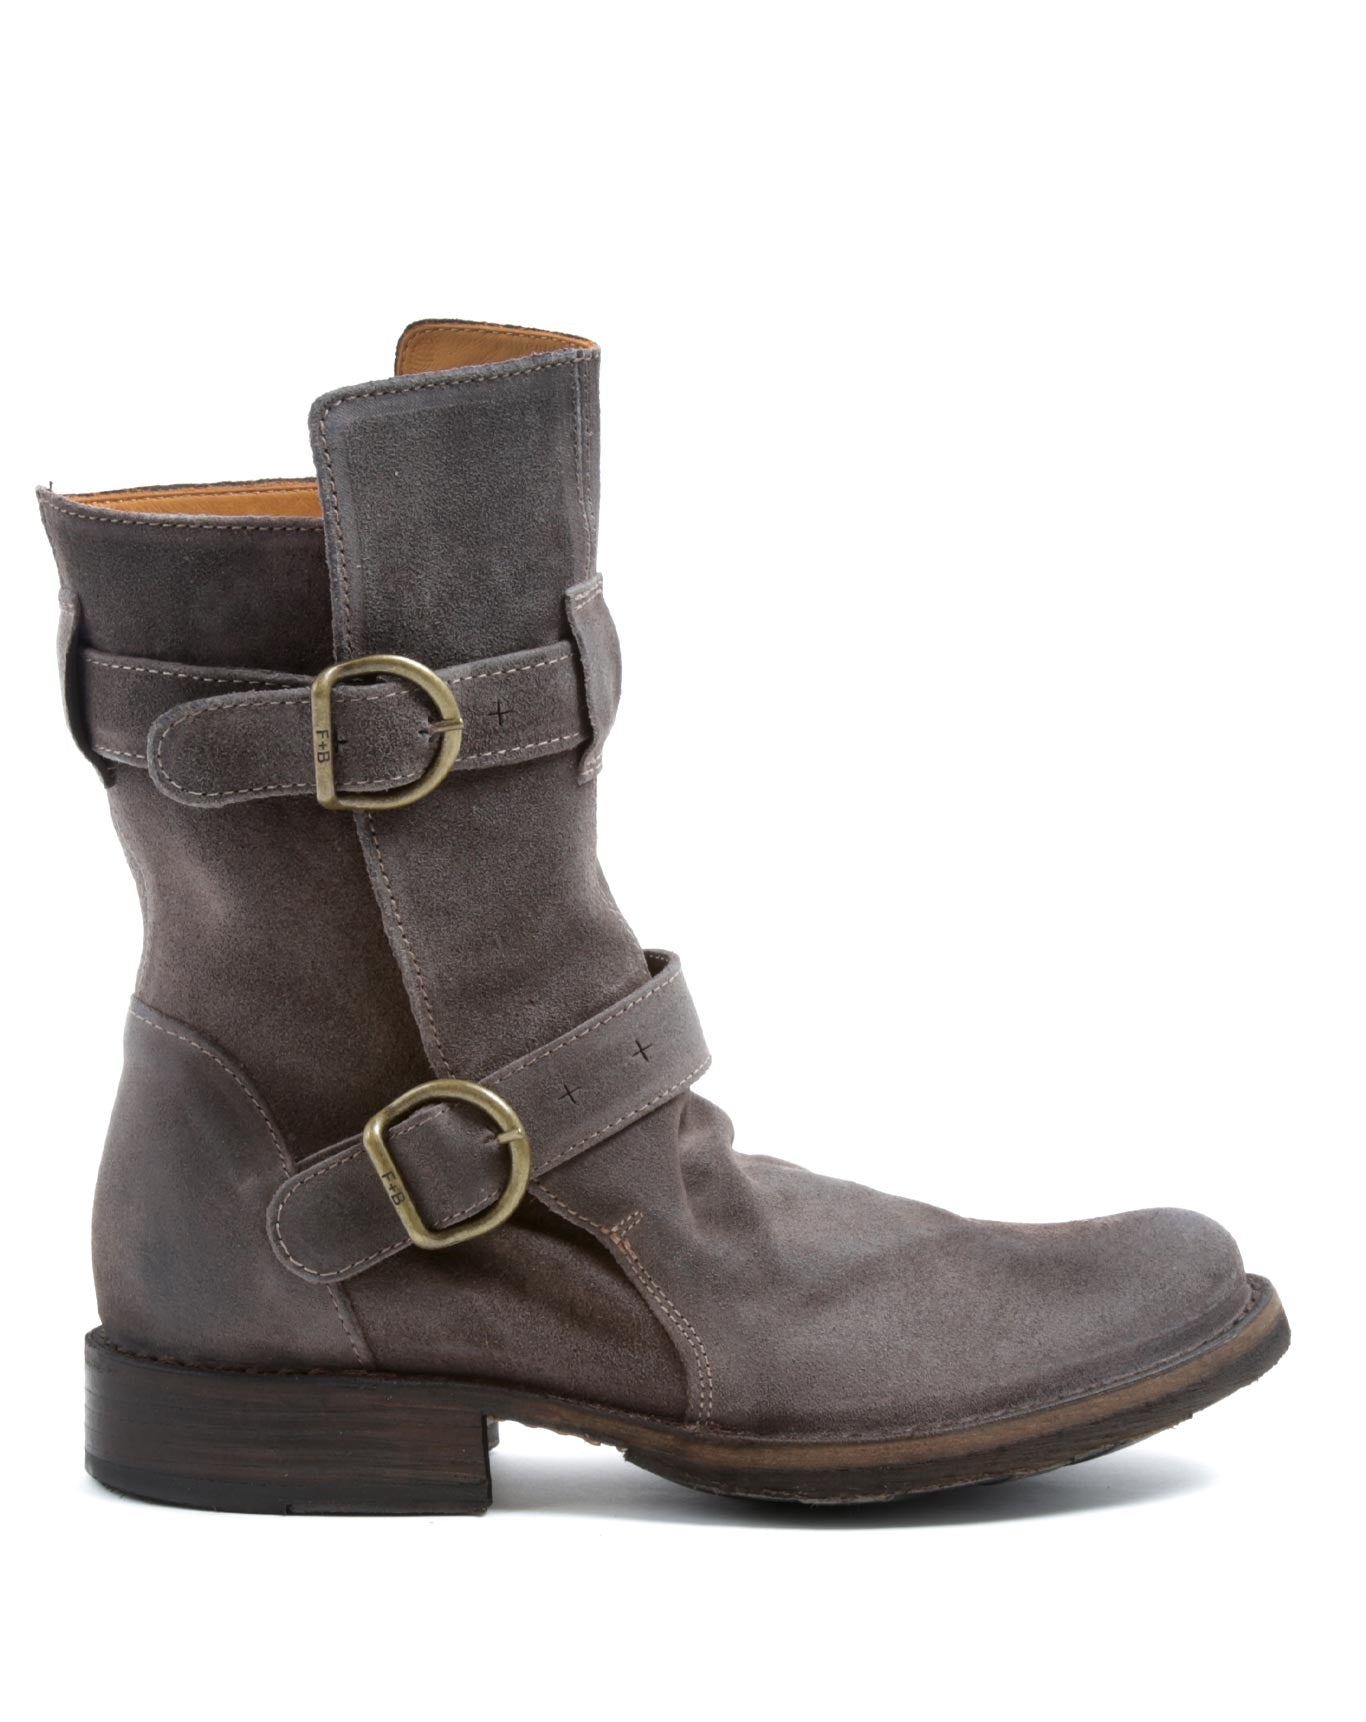 Fiorentini + Baker, ETERNITY 713, 2 buckles ankle boot inspired by rock stars. Handcrafted with natural leather by skilled artisans. Made in Italy. Made to last.